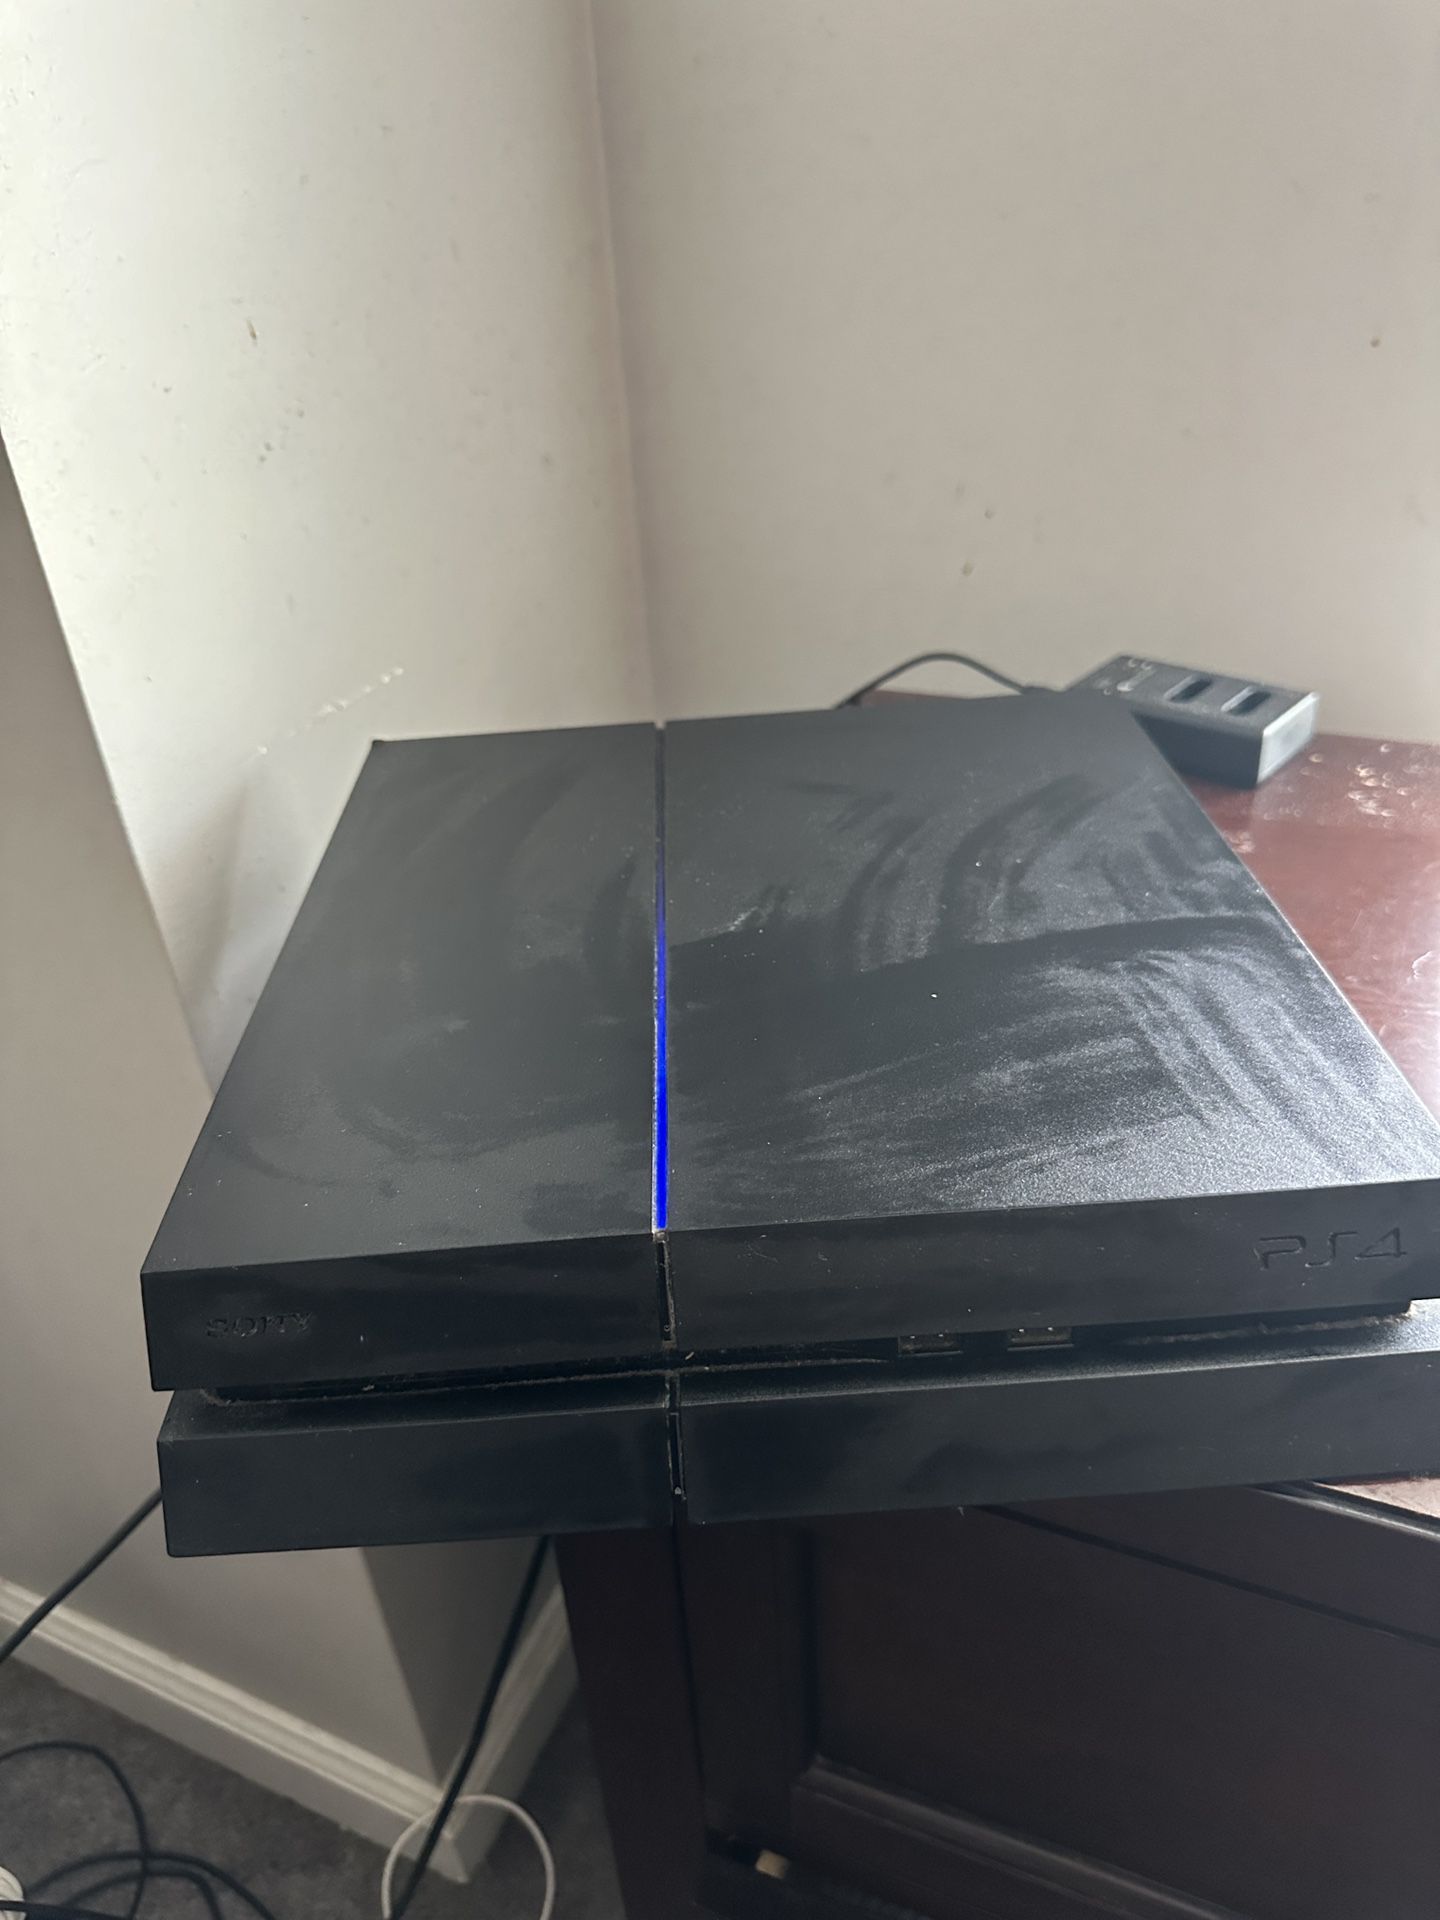 2 PS4’s For Sale